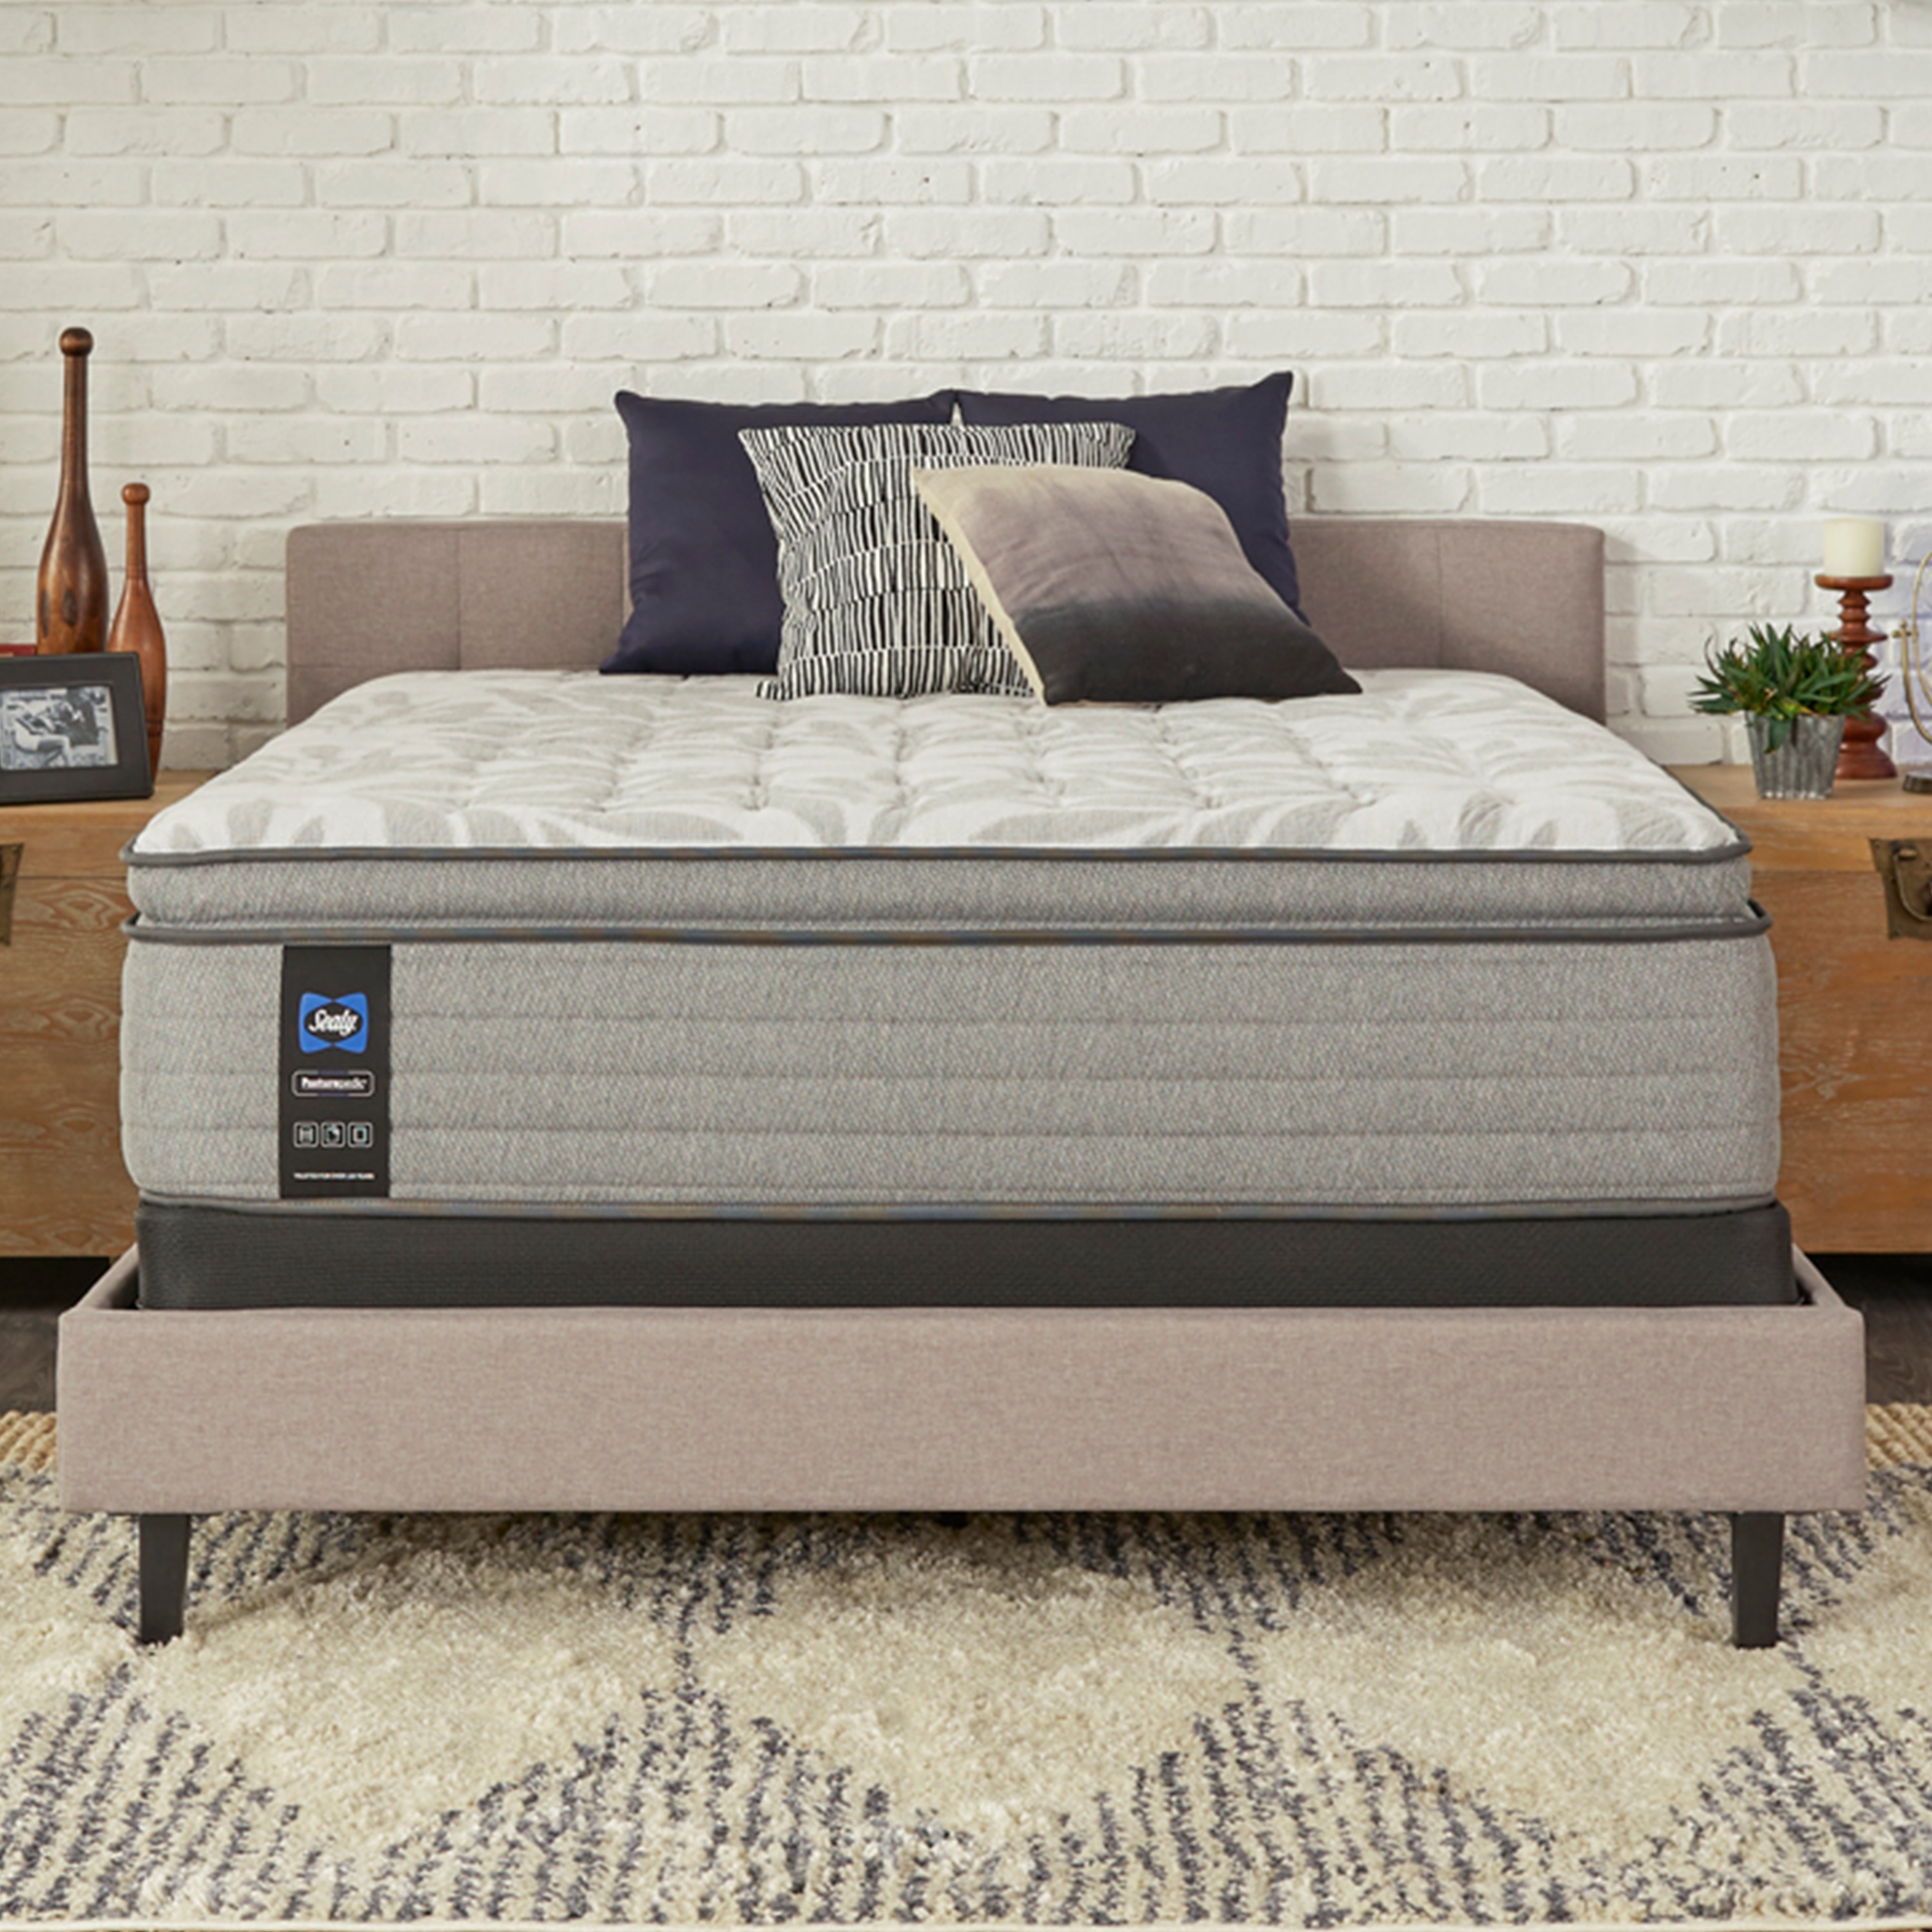 Sealy Mattress and Box Spring Sets - Bed Bath & Beyond